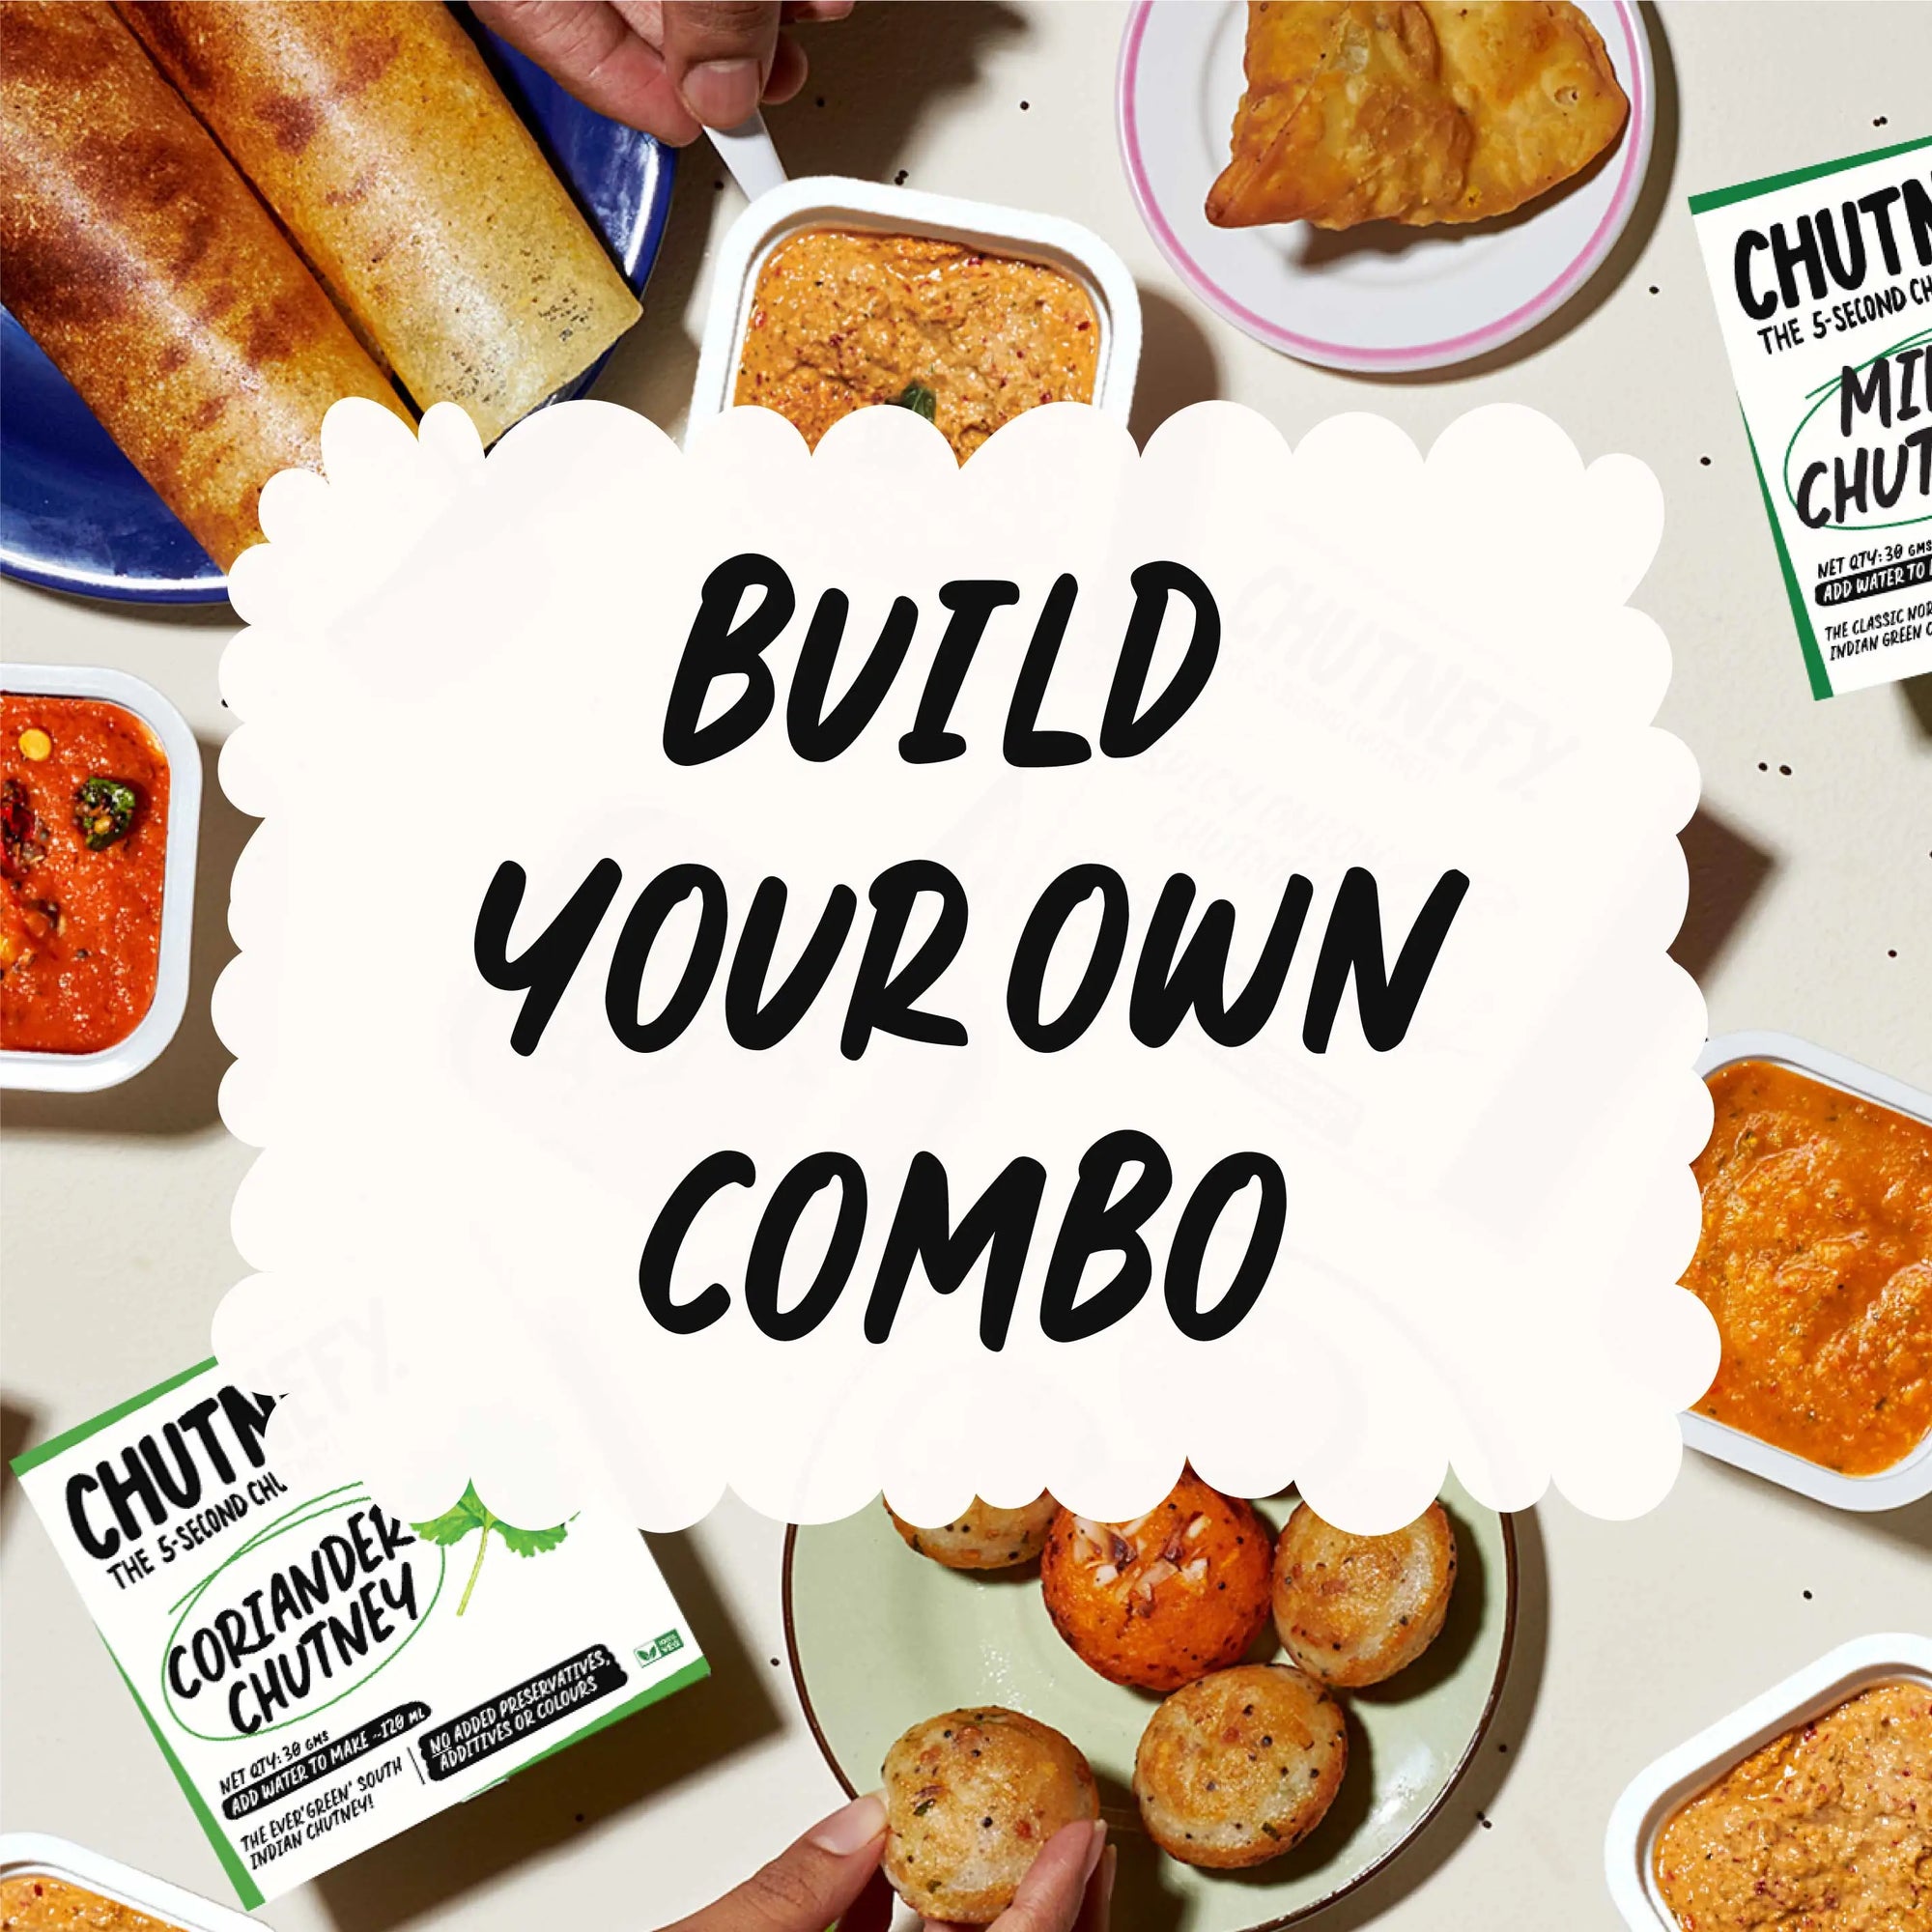 BUILD YOUR OWN COMBO